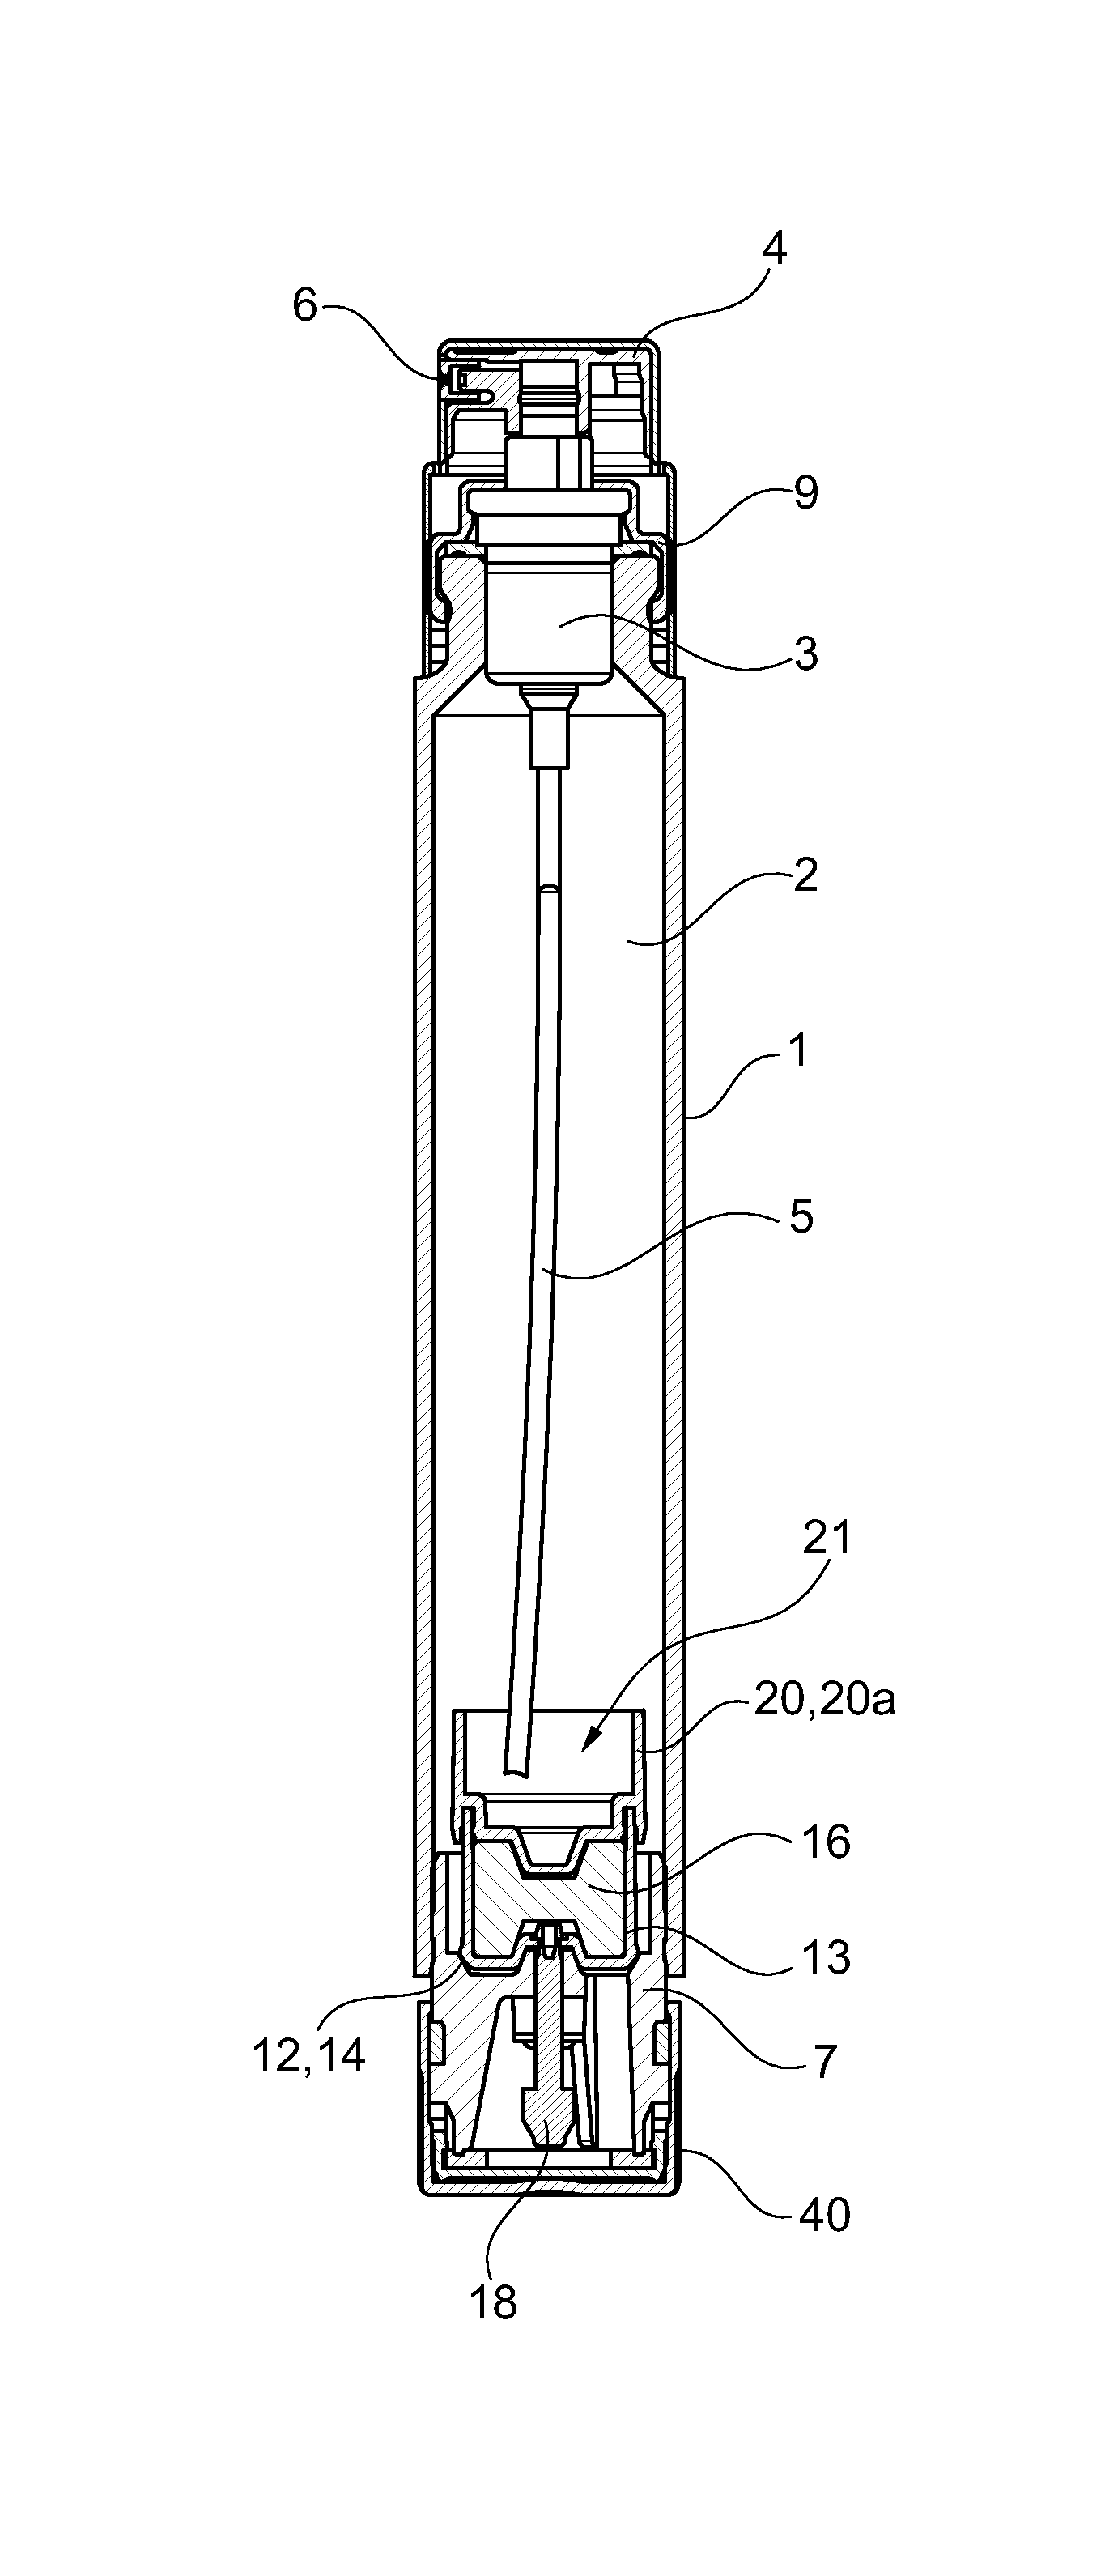 Refillable bottle for dispensing a fluid product